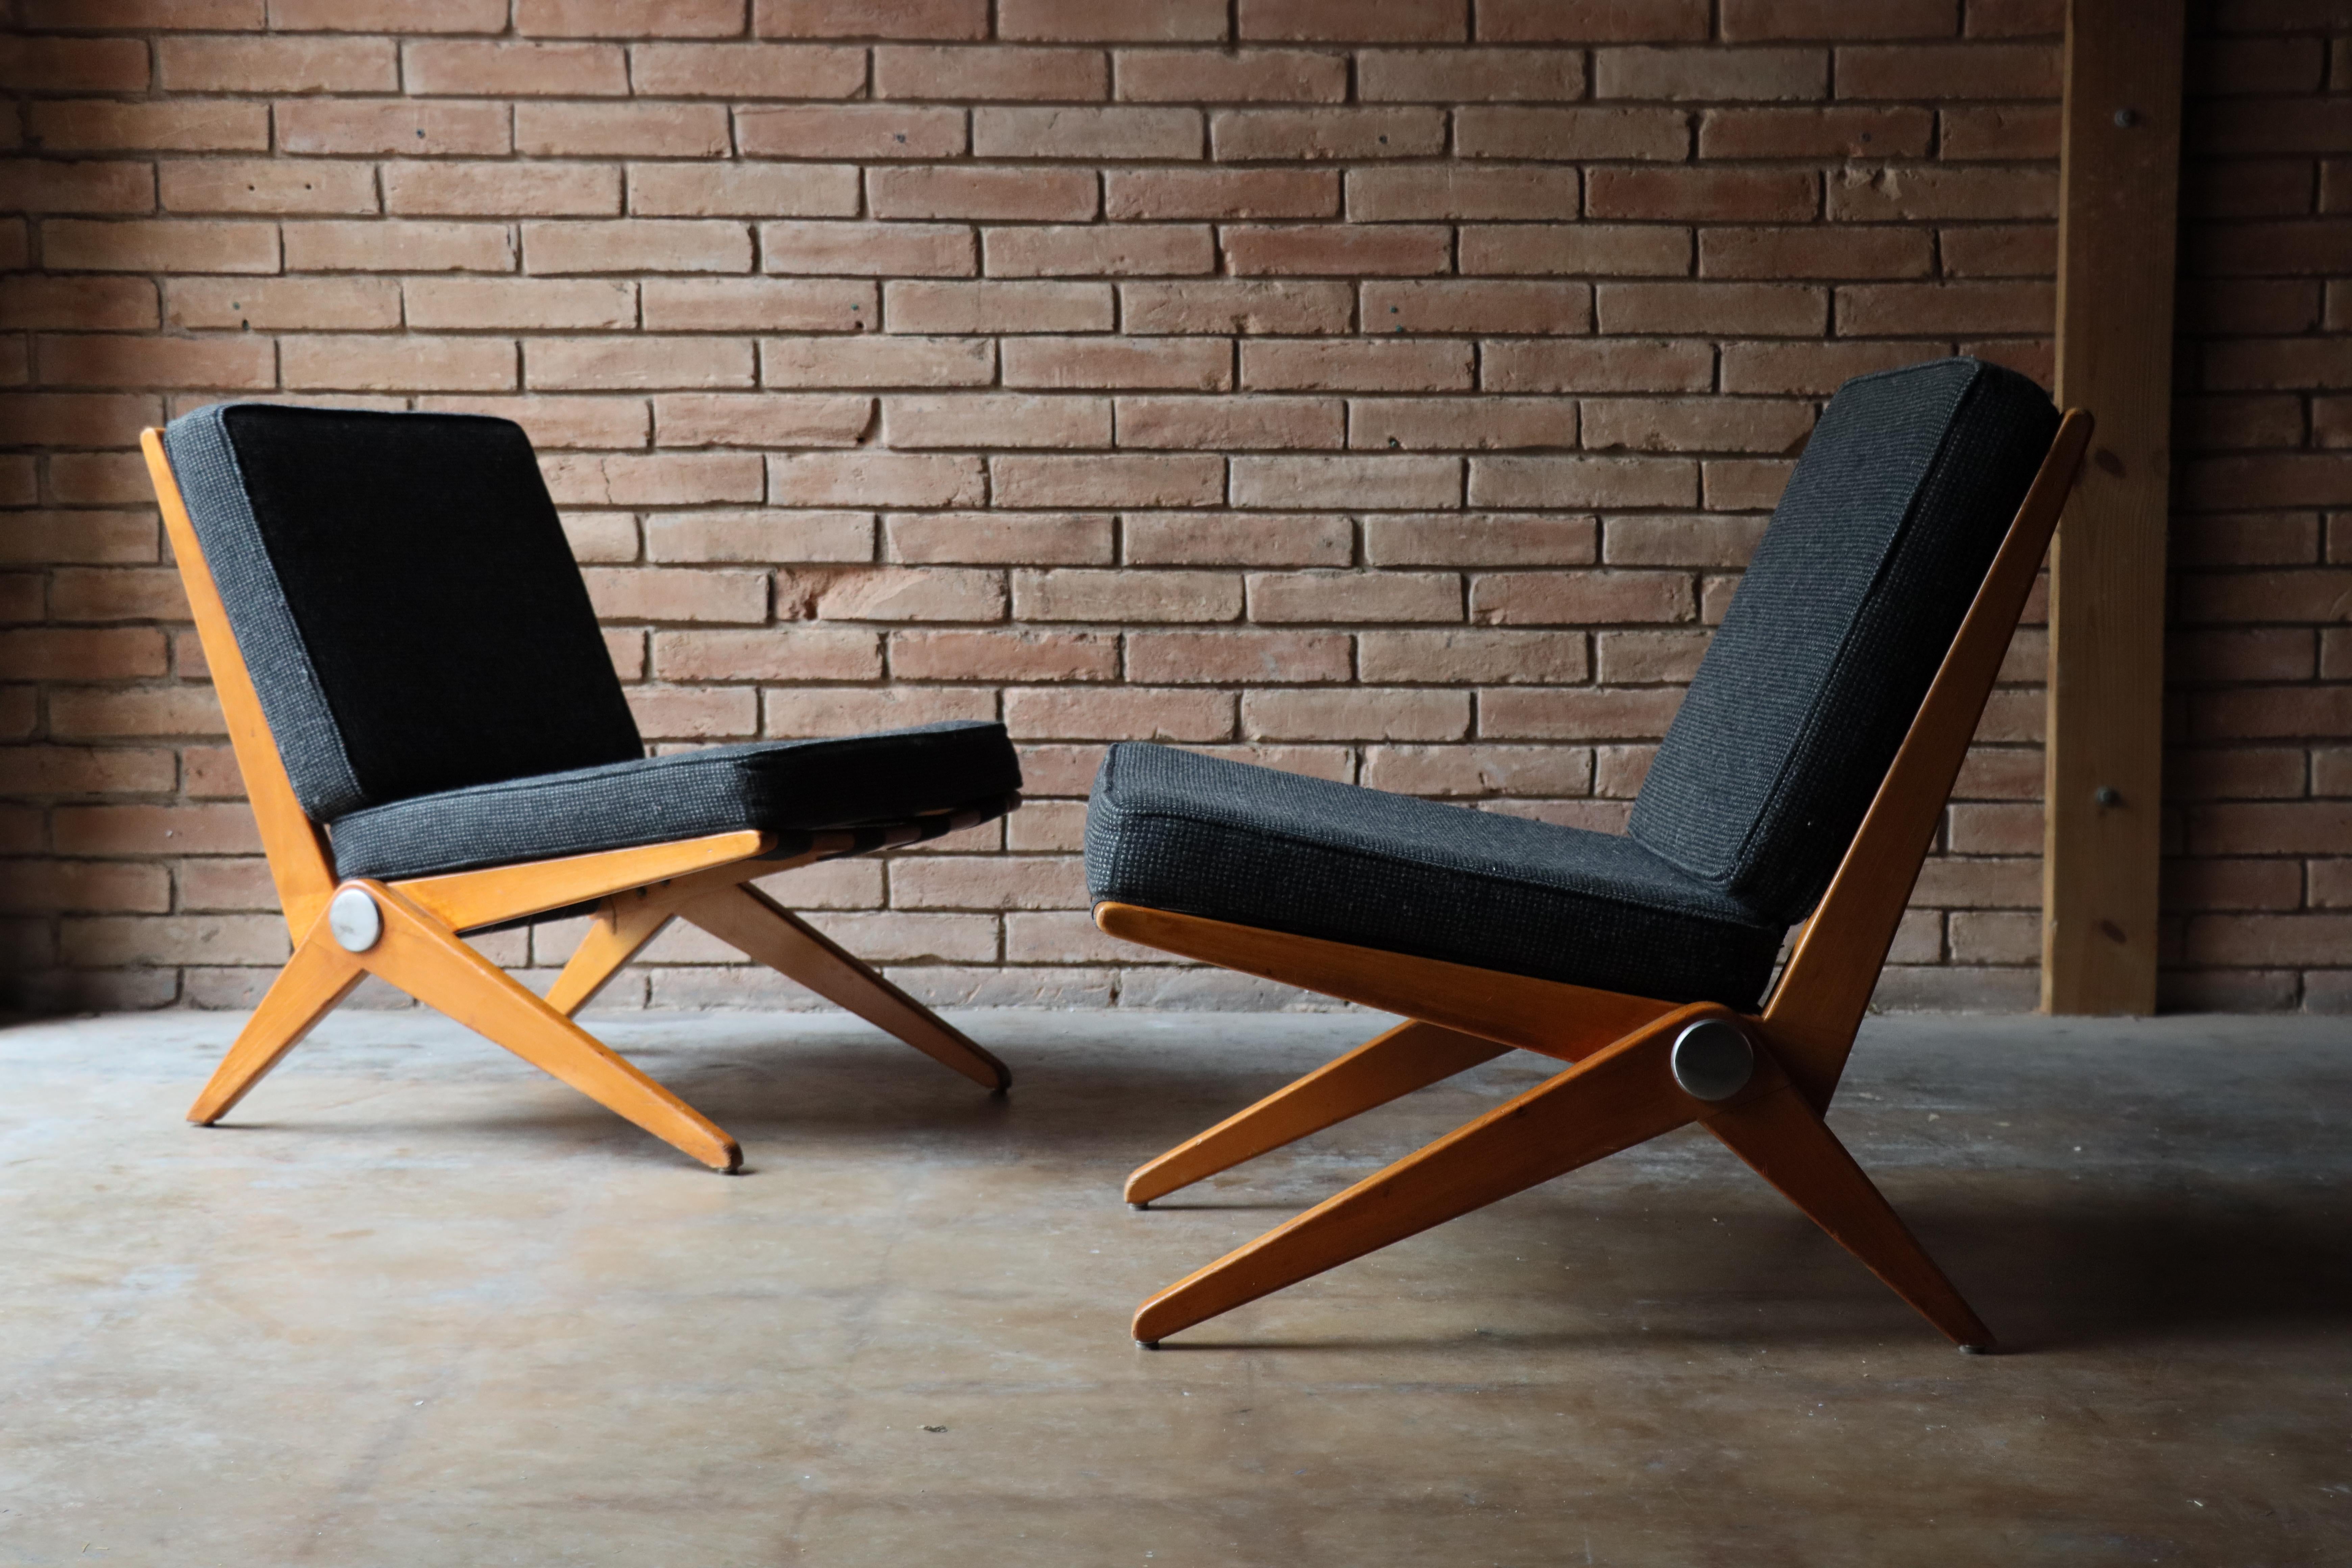 Pair of vintage ‘scissor’ chairs designed by Pierre Jeanneret for Knoll International - 1948

 A harmonious blend of form and function. Crafted with precision, these chairs boast a distinctive scissor-like frame, marrying classic modern design with